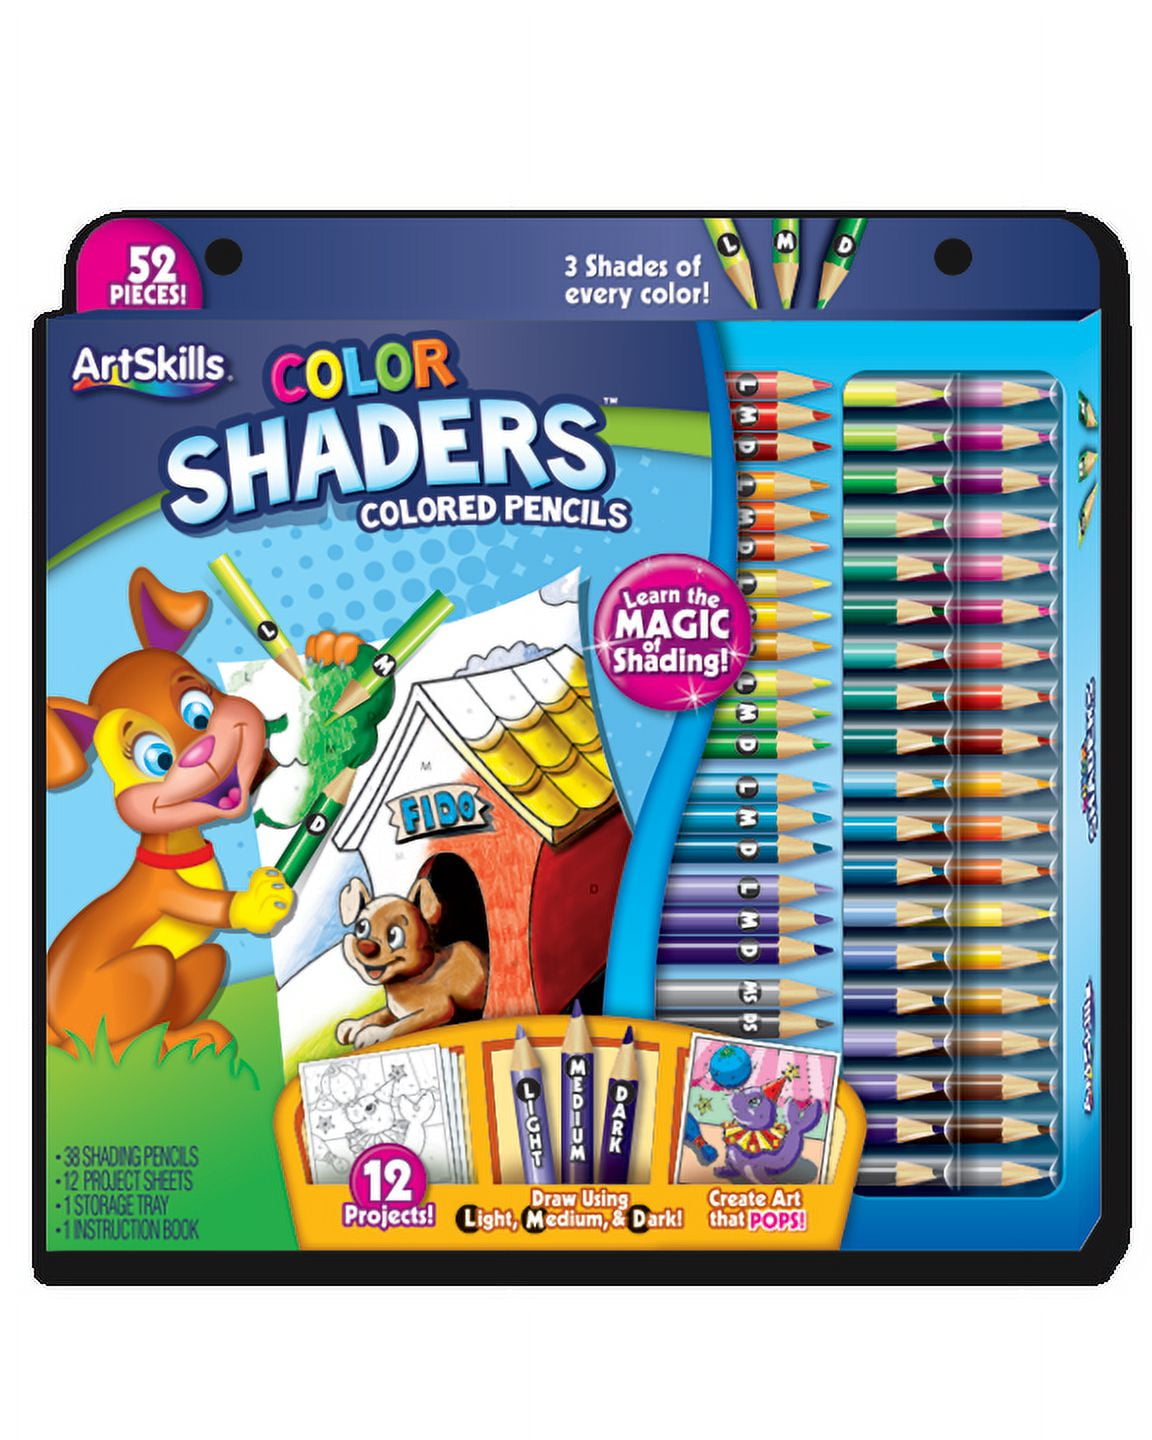 Art Magic Pre-Sharpened Watercolor Pencils Set for Drawing & Coloring with 4 of